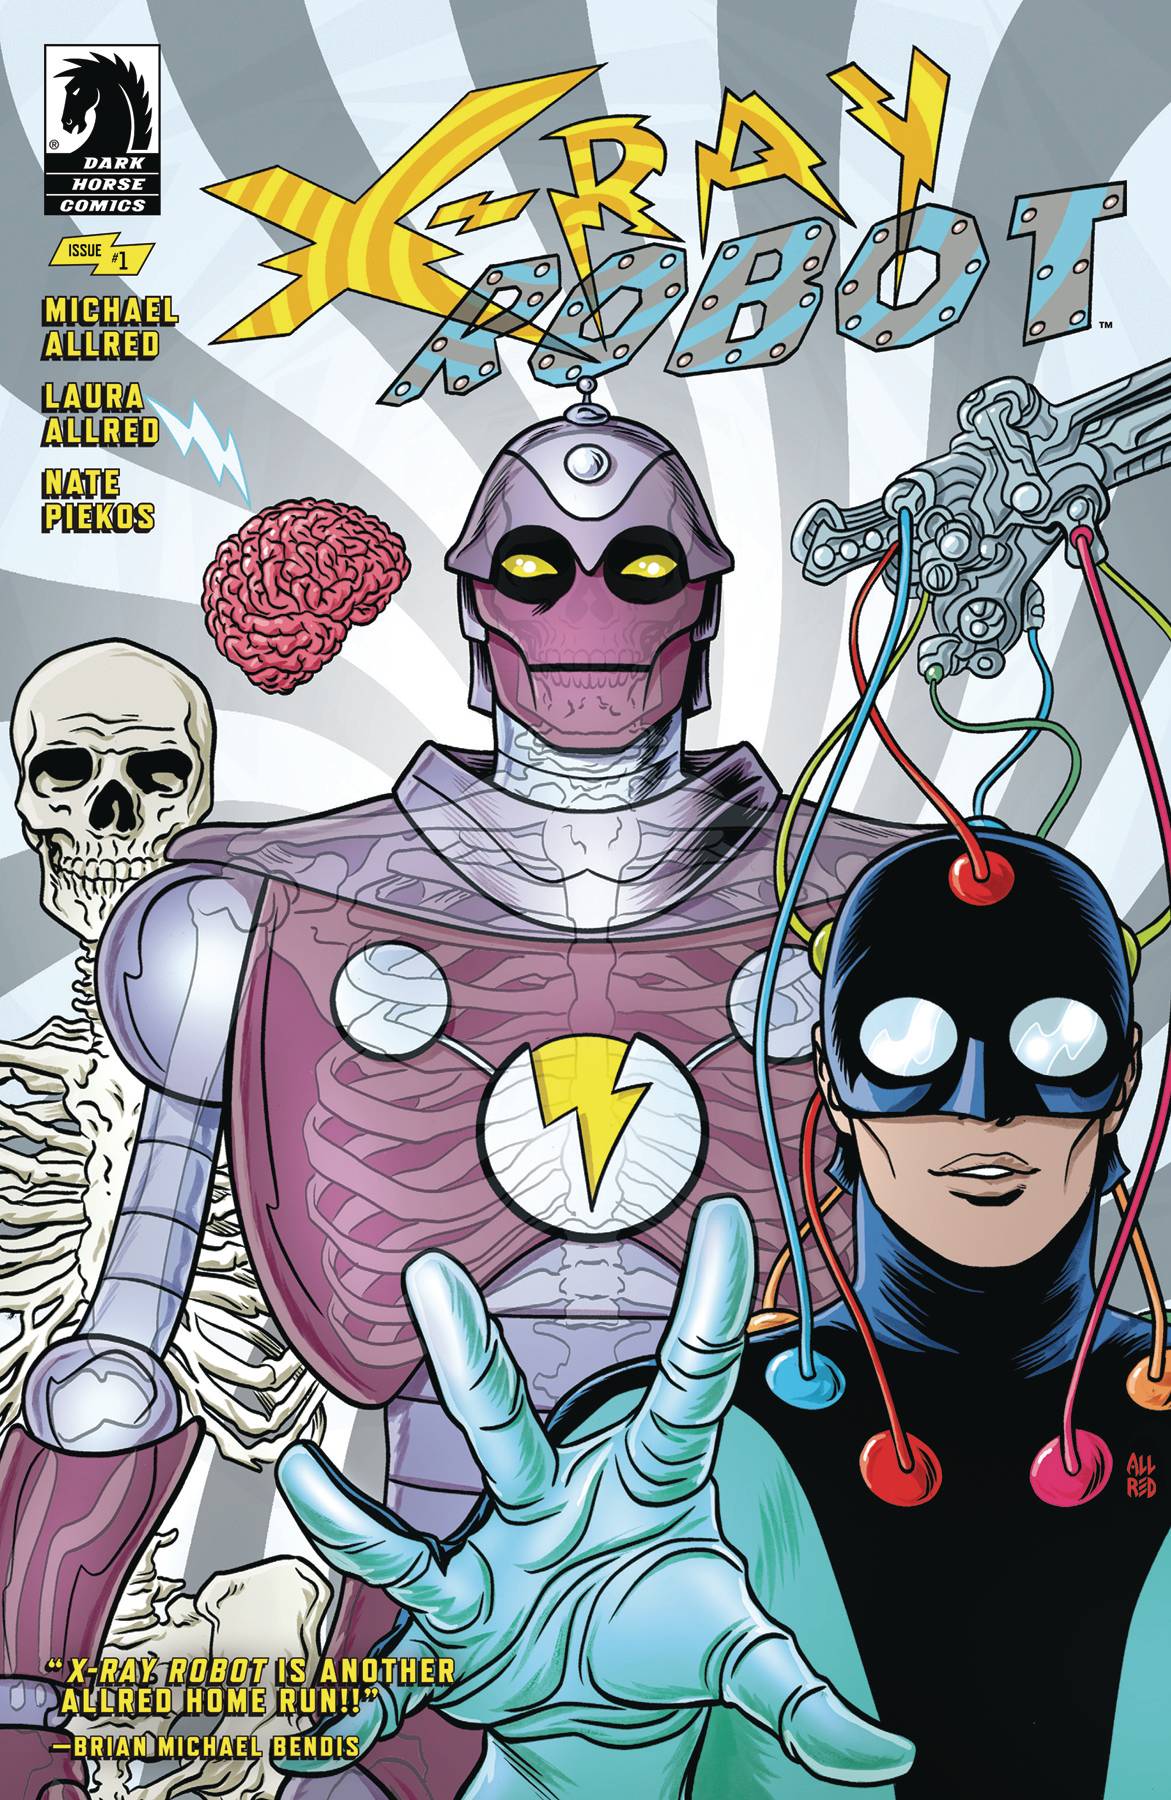 X-Ray Robot #1 Cover A Allred (Of 4)